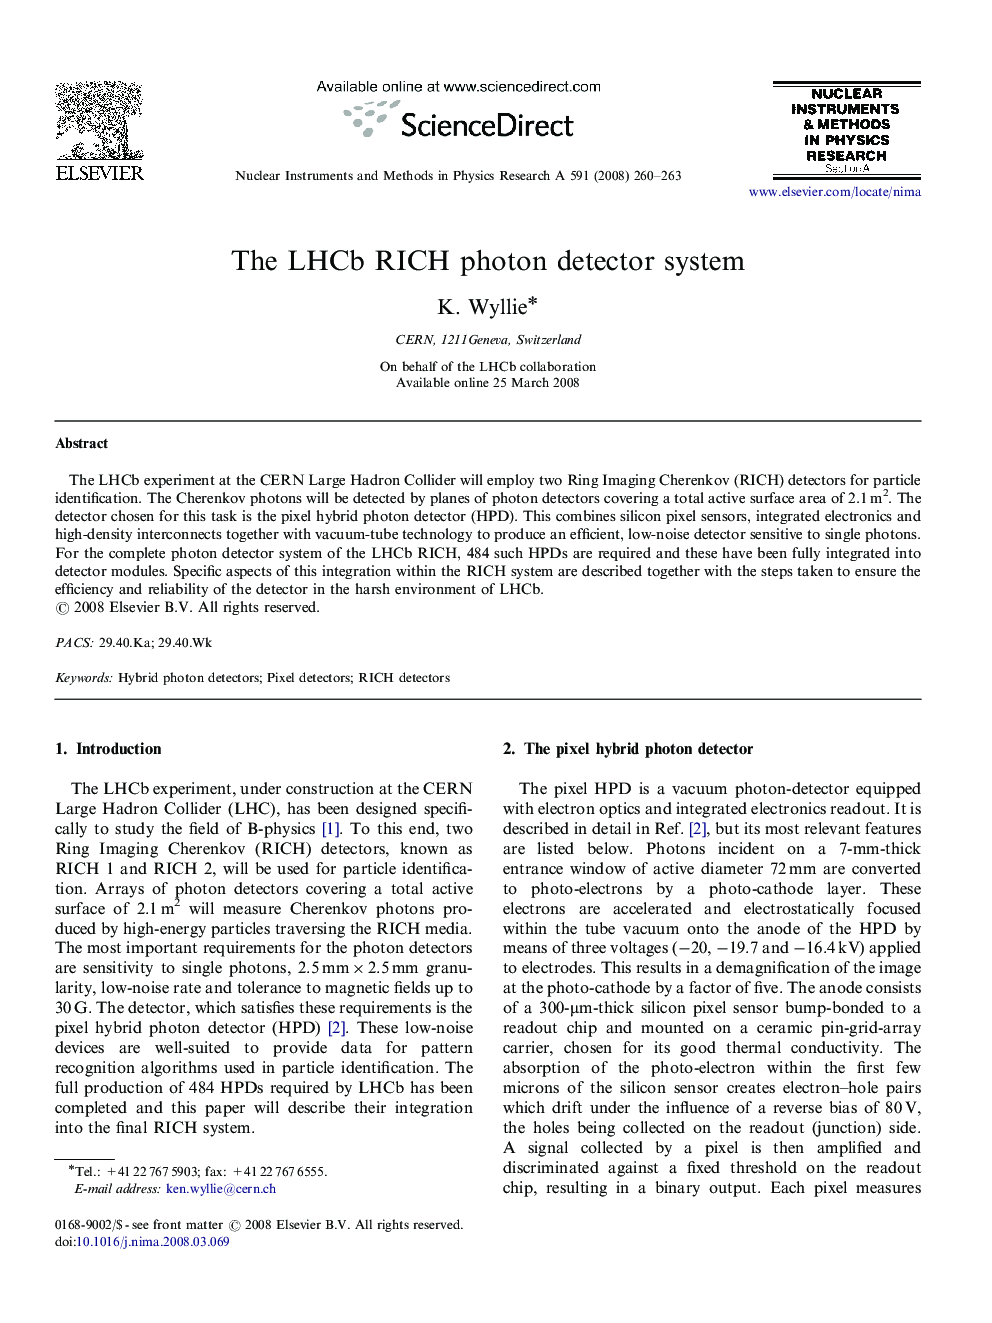 The LHCb RICH photon detector system